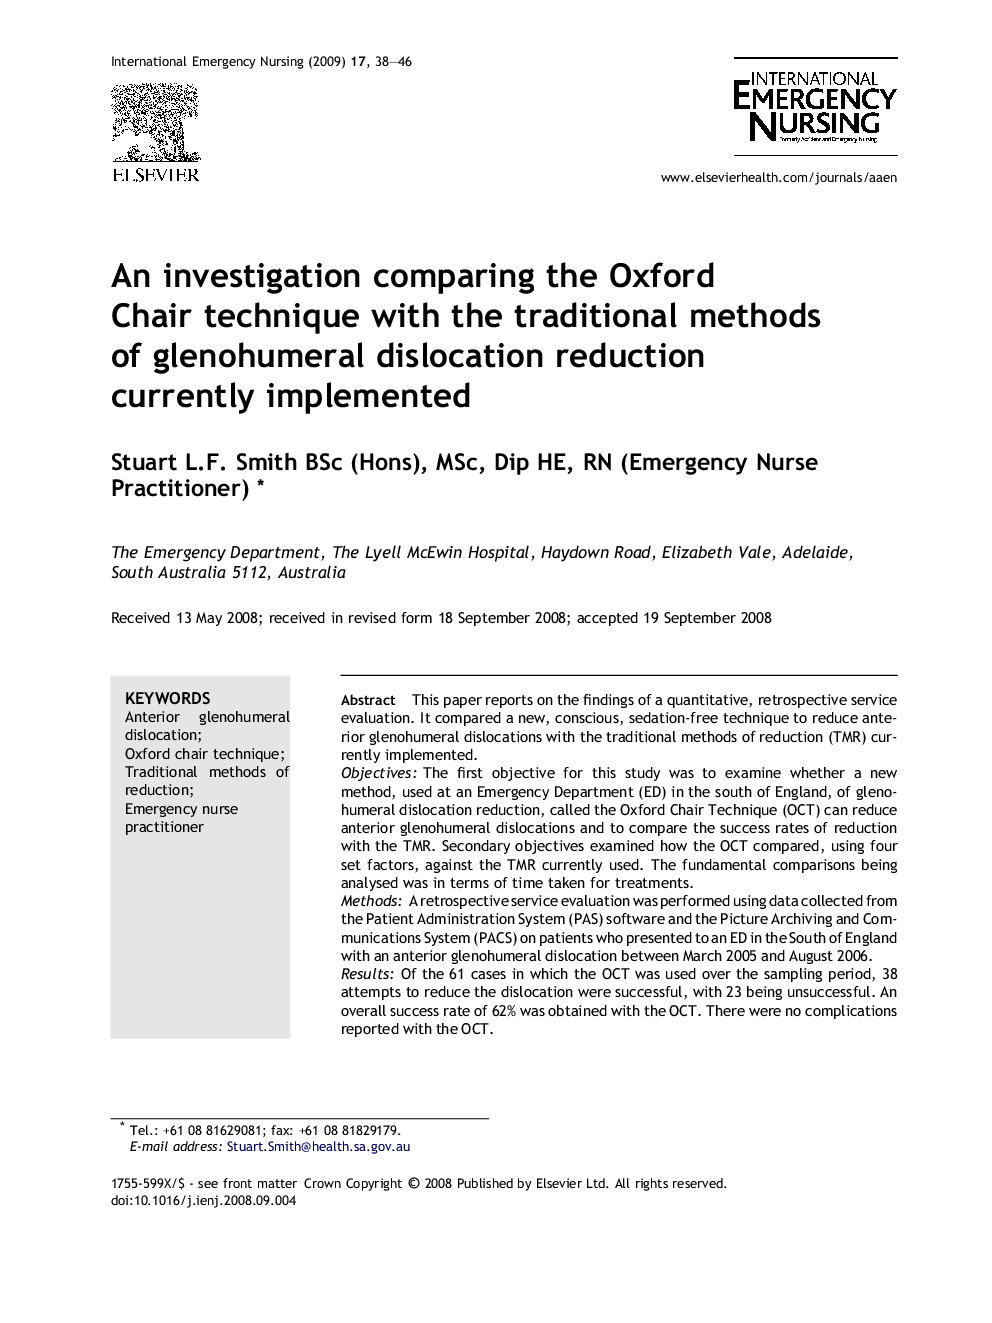 An investigation comparing the Oxford Chair technique with the traditional methods of glenohumeral dislocation reduction currently implemented